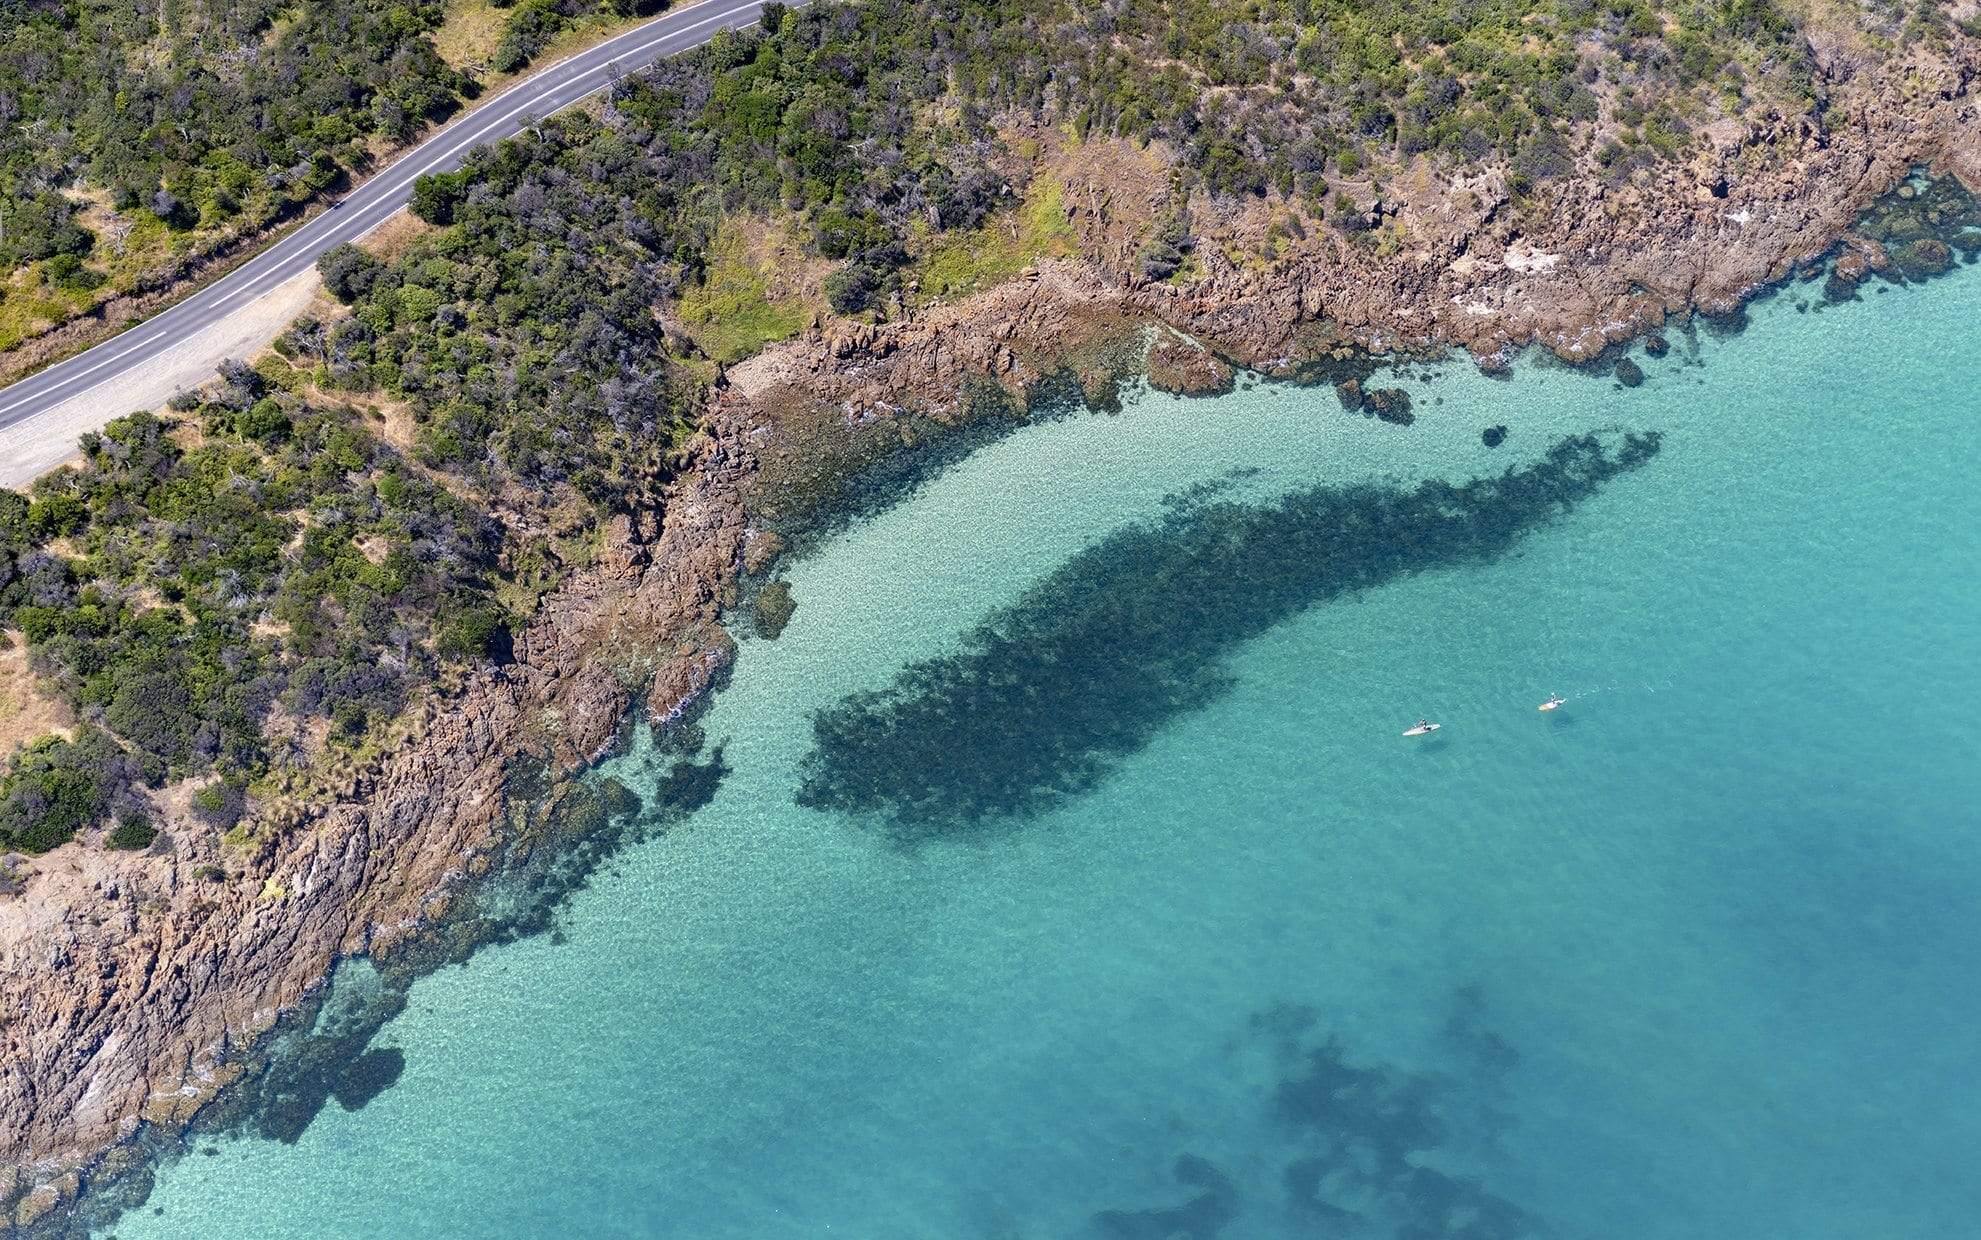 Aerial view of a seashore with a mountain wall and a road, Magical Day, Mount Martha - Mornington Peninsula VIC